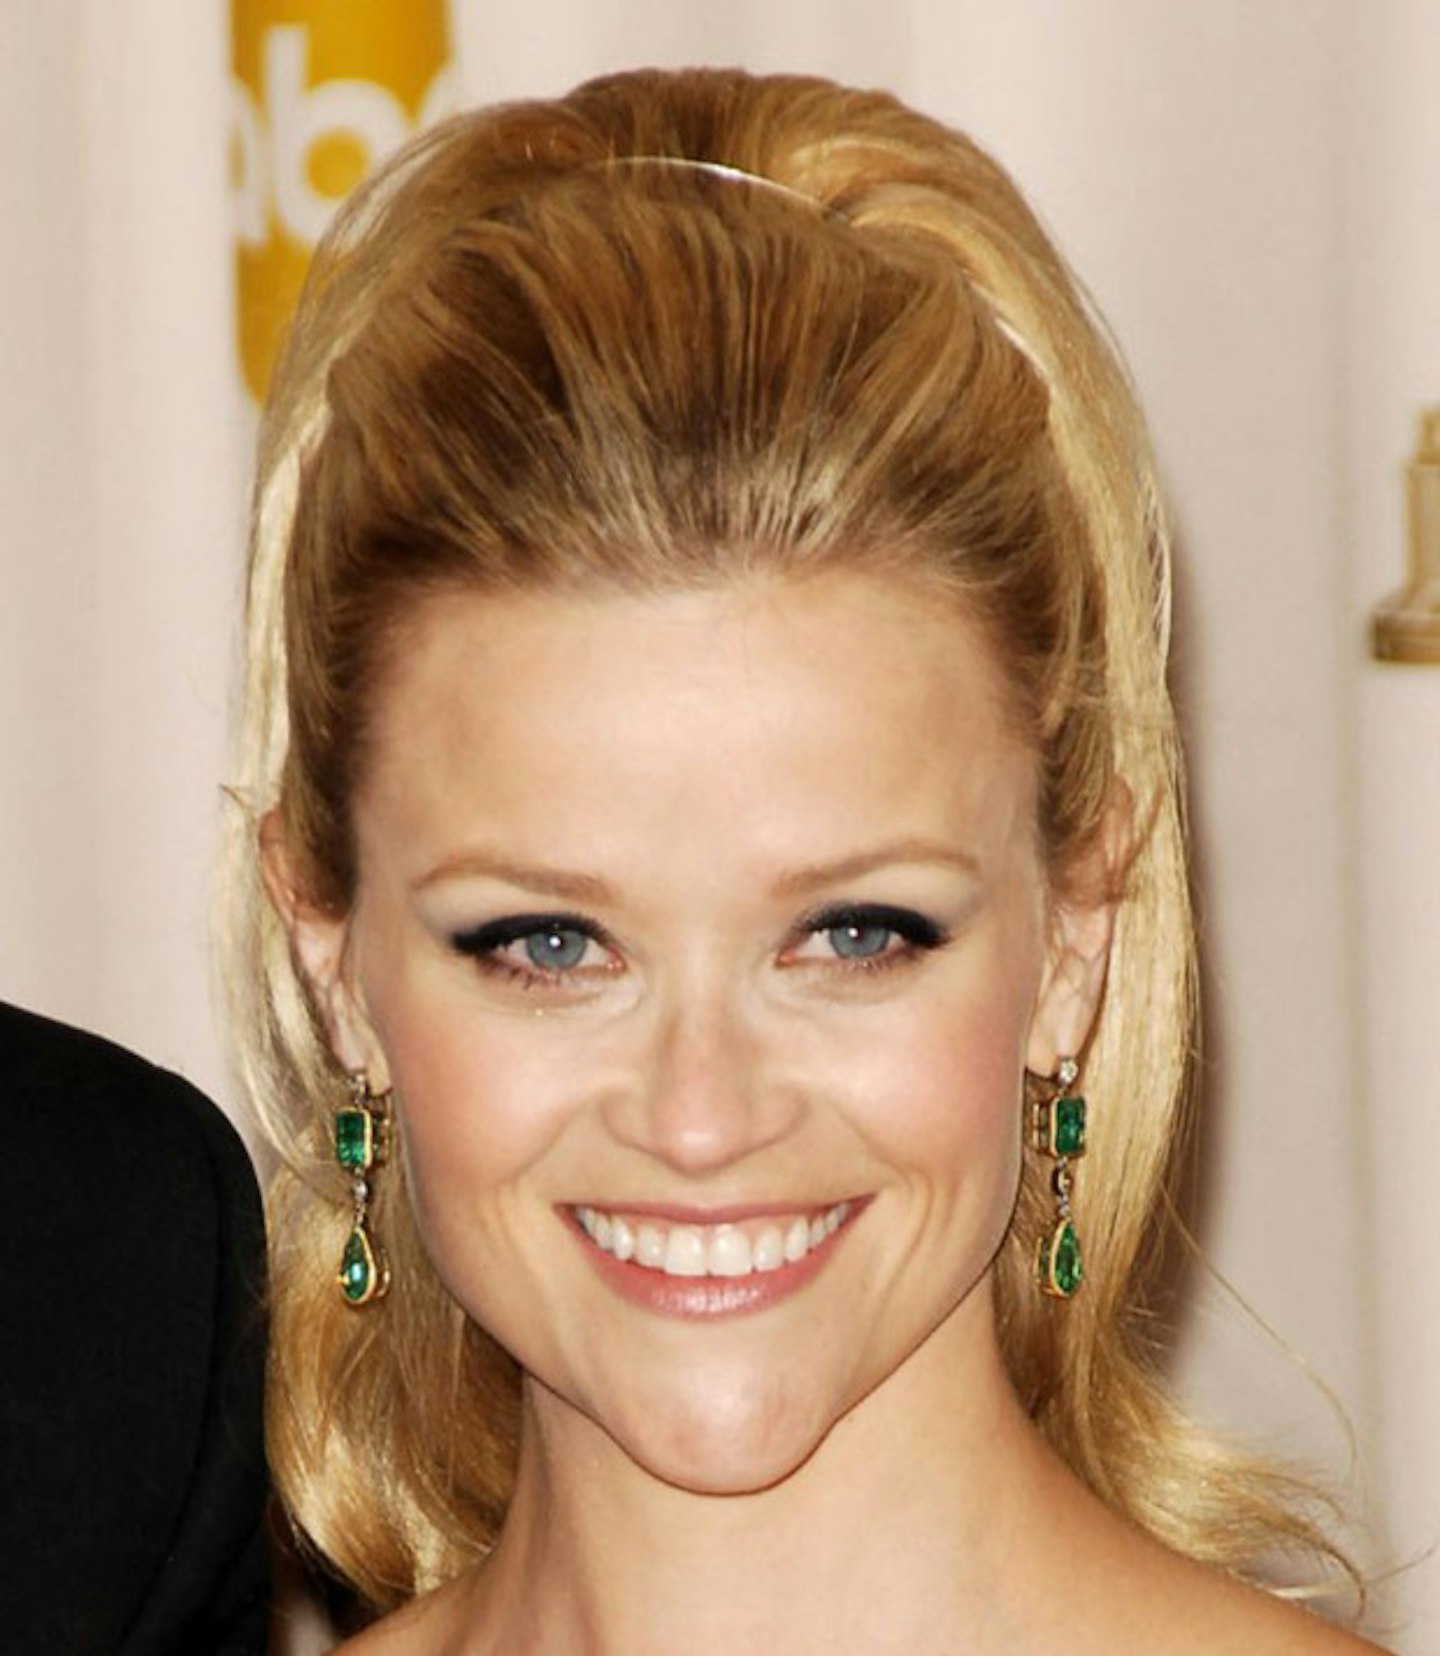 Reese Witherspoon's uber glam ponytail